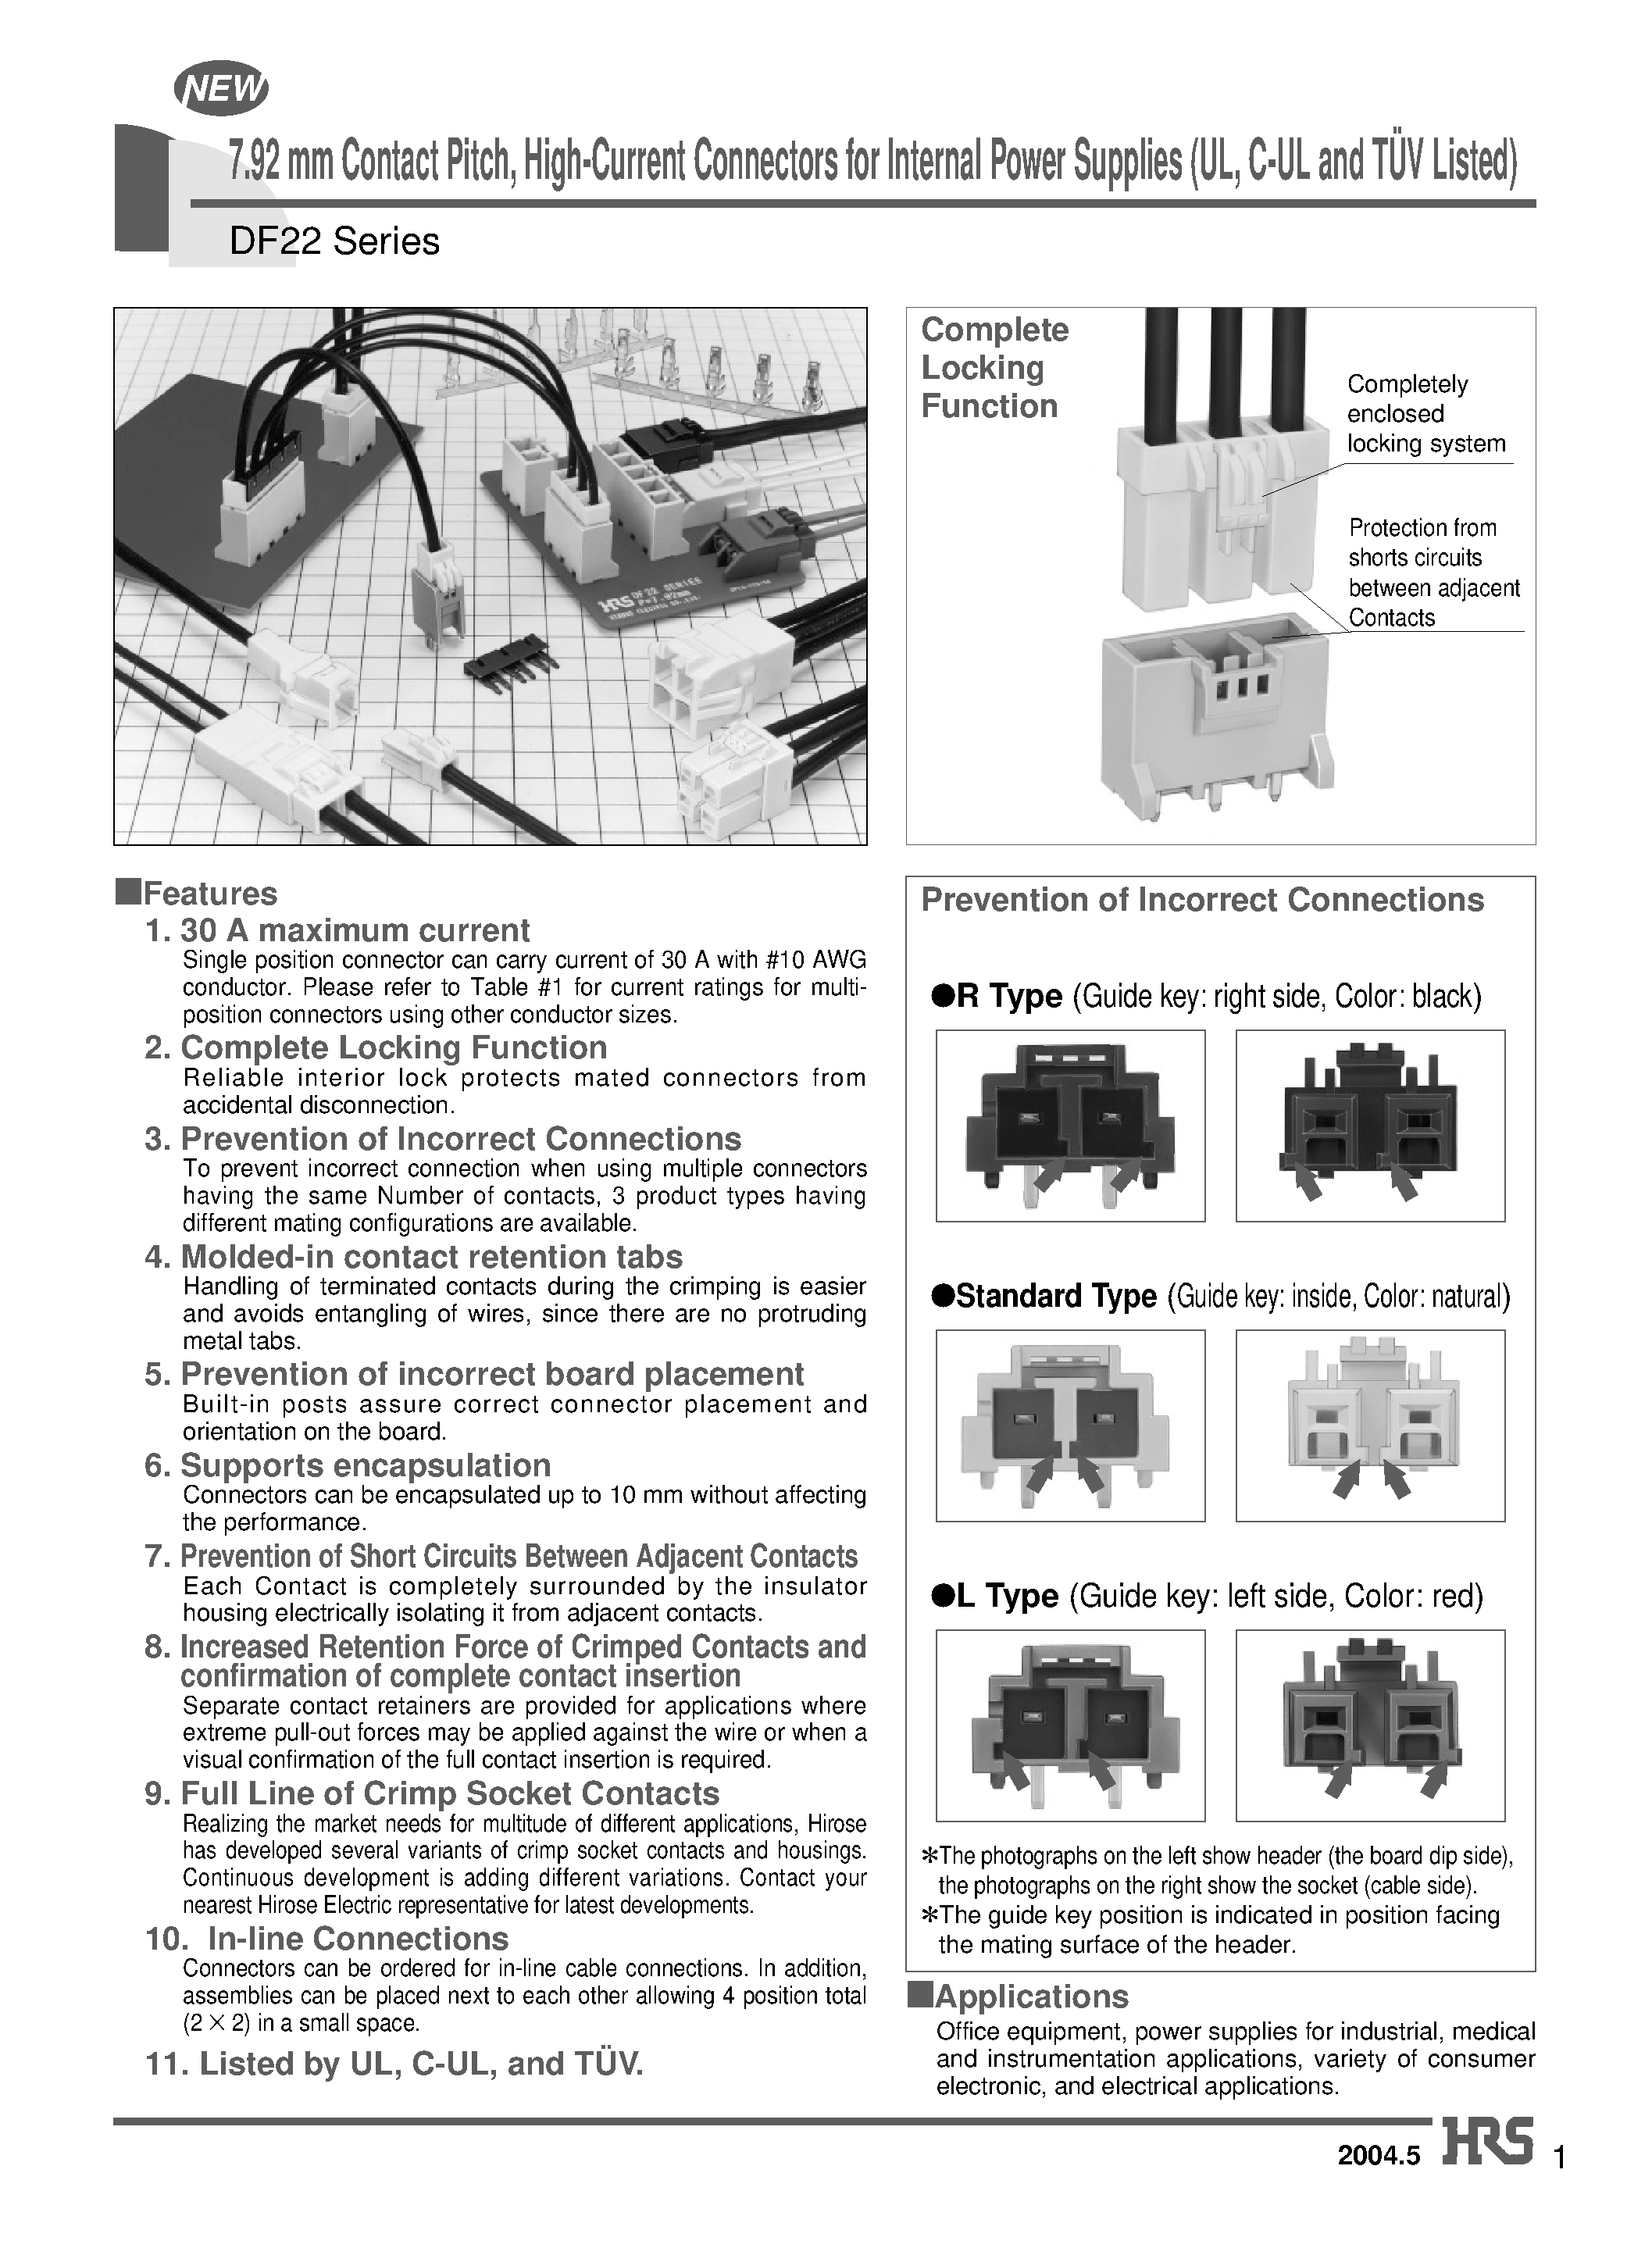 Datasheet DF22-4S-7.92C - 7.92 mm Contact Pitch/ High-Current Connectors for Internal Power Supplies (UL/ C-UL and TUV Listed) page 1